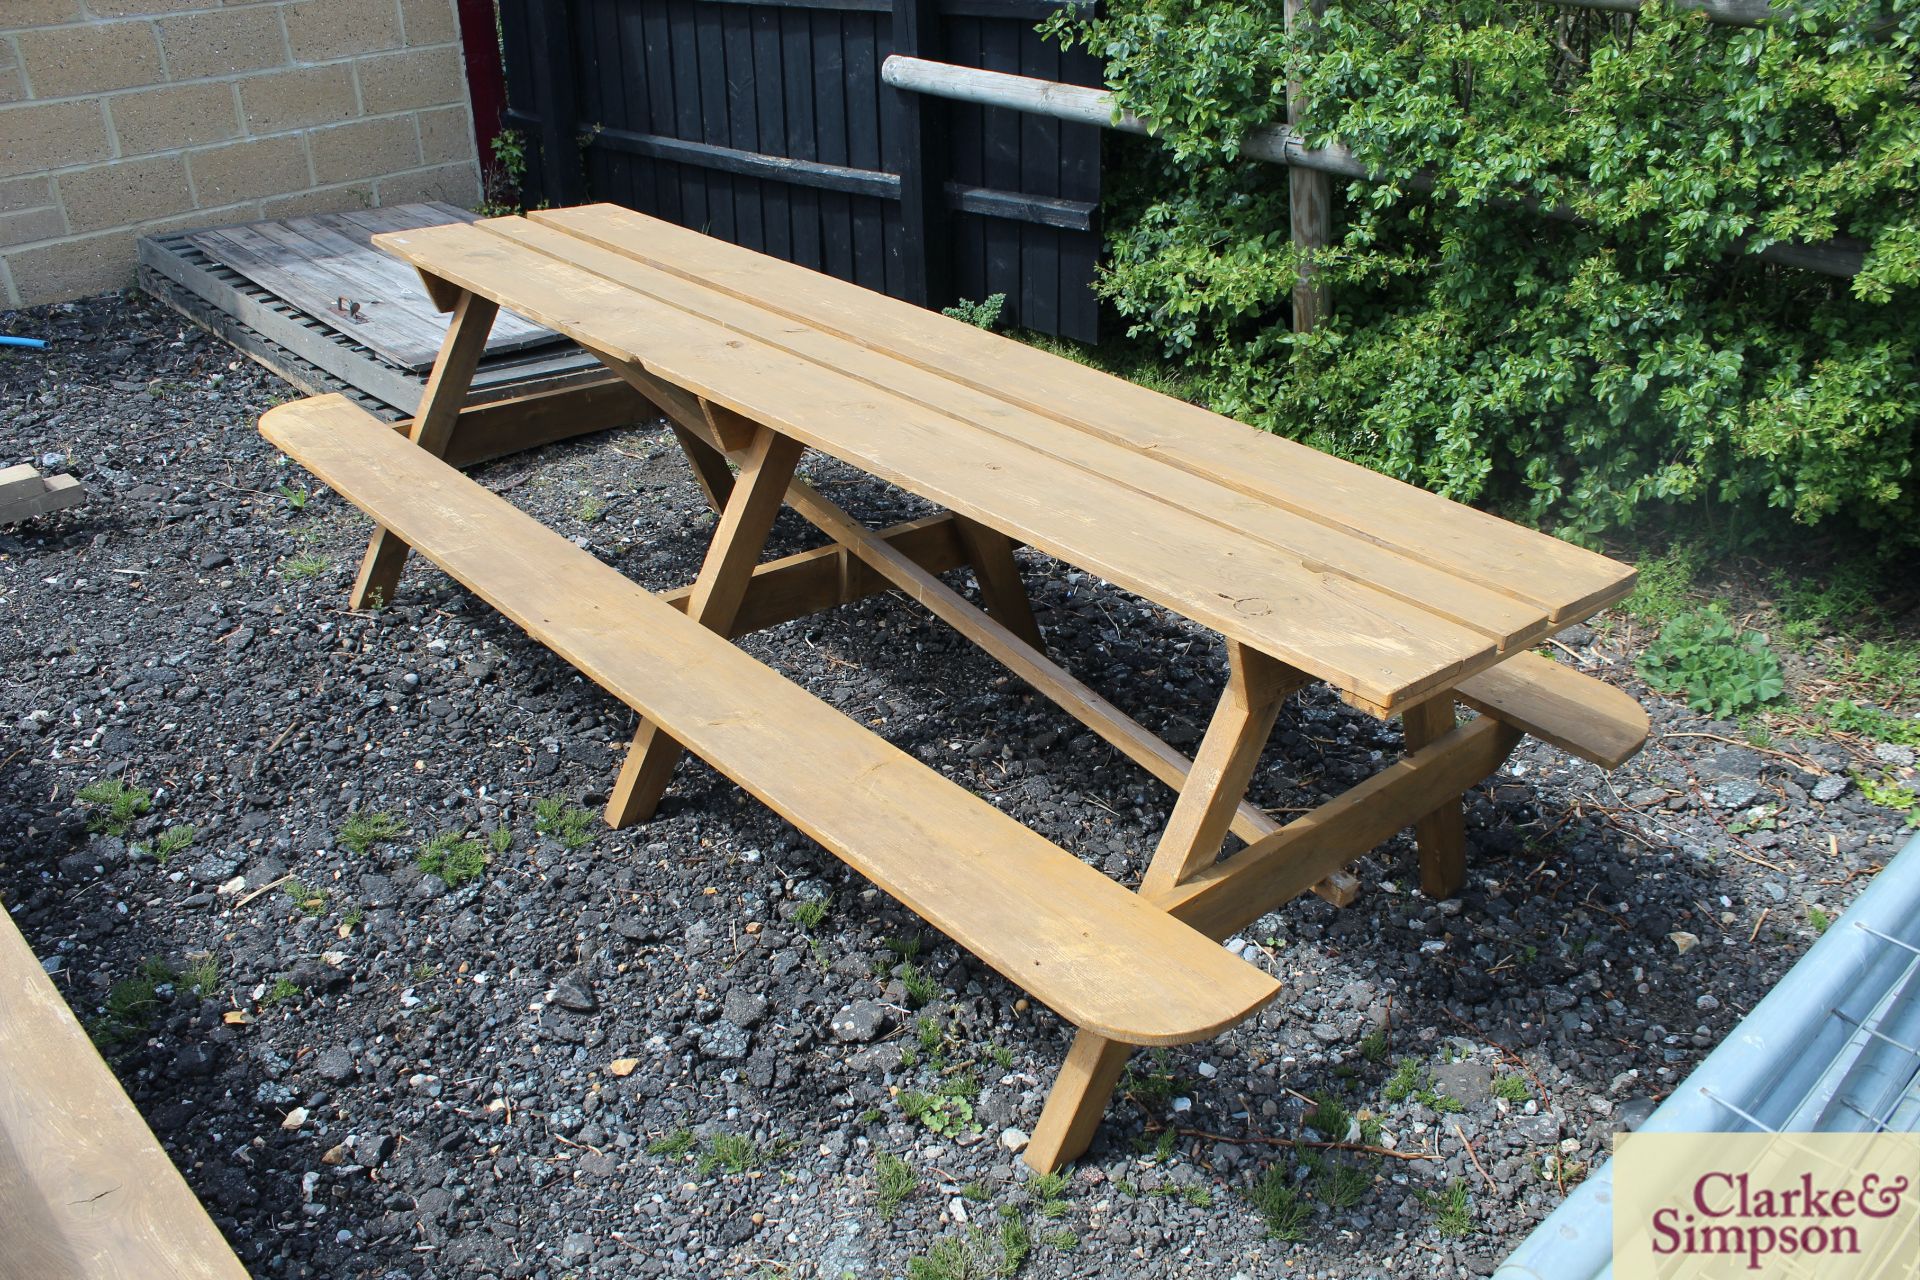 8ft wooden picnic bench. - Image 2 of 3